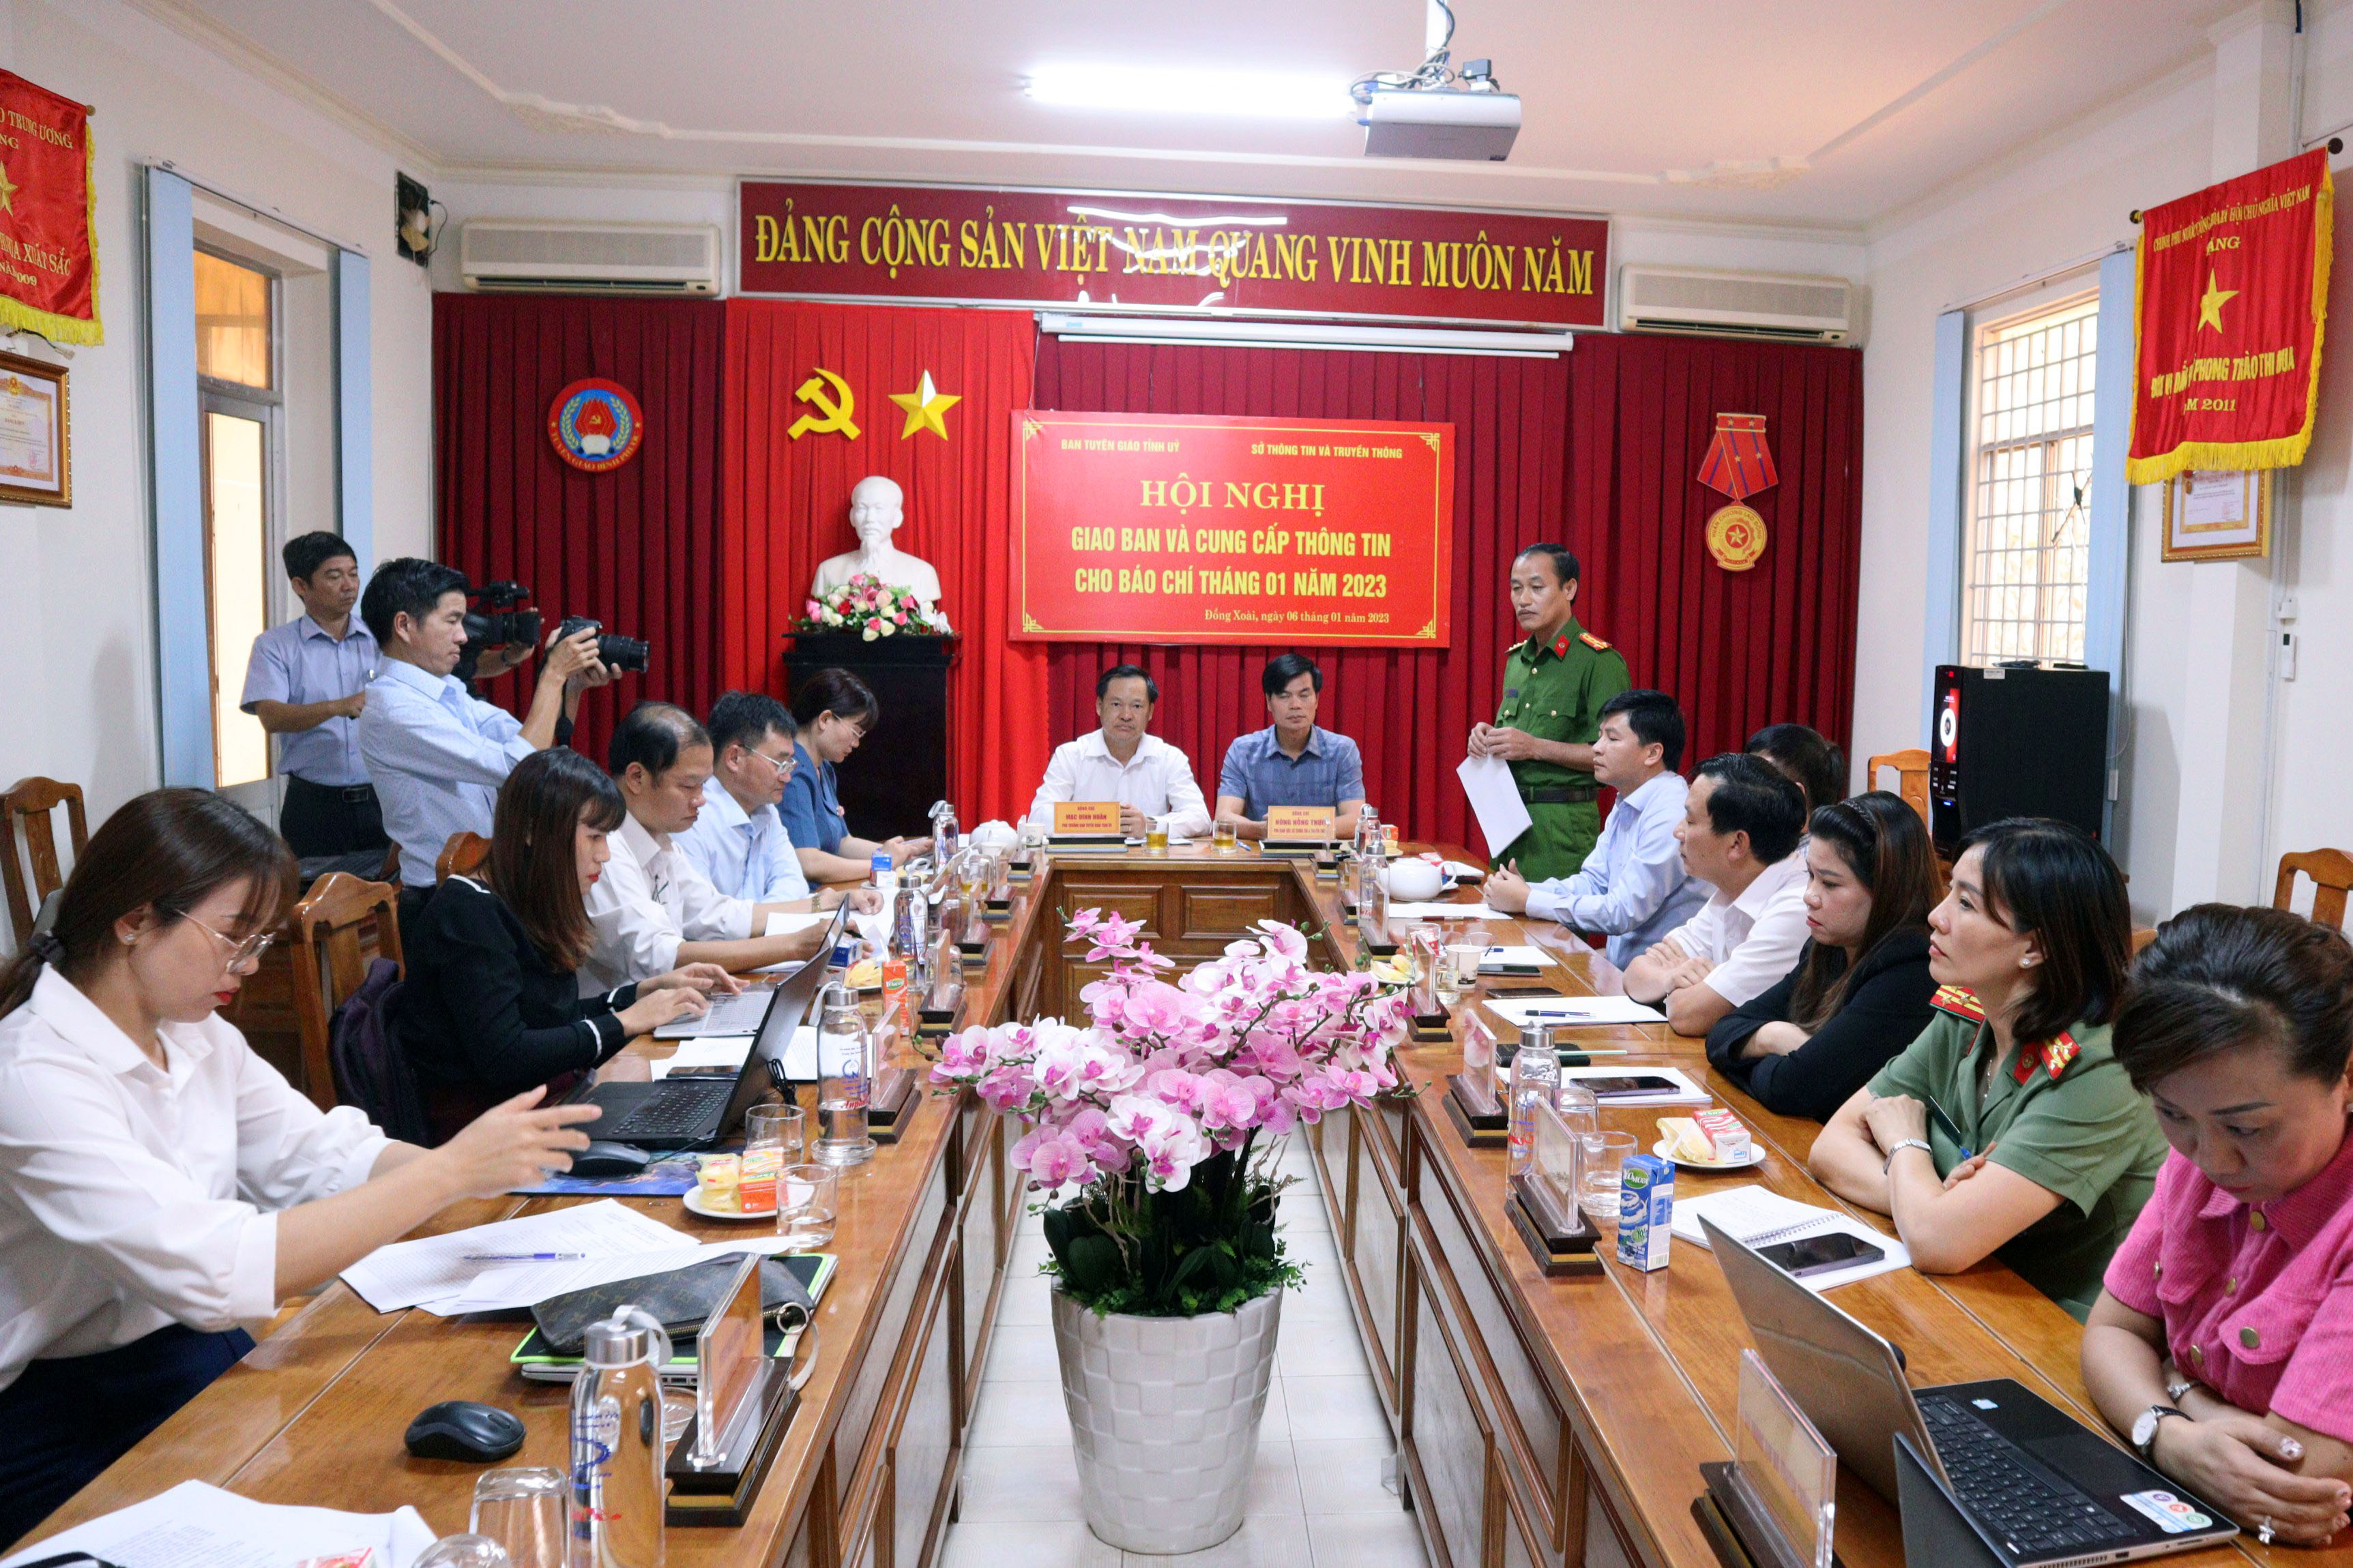 Colonel Nguyen Huy Hai (R, standing), deputy director of the Binh Phuoc Department of Public Security, speaks at a press briefing on the fire truck accident that killed two officers and injured four others in Binh Phuoc Province, Vietnam, January 6, 2023. Photo: A.B. / Tuoi Tre